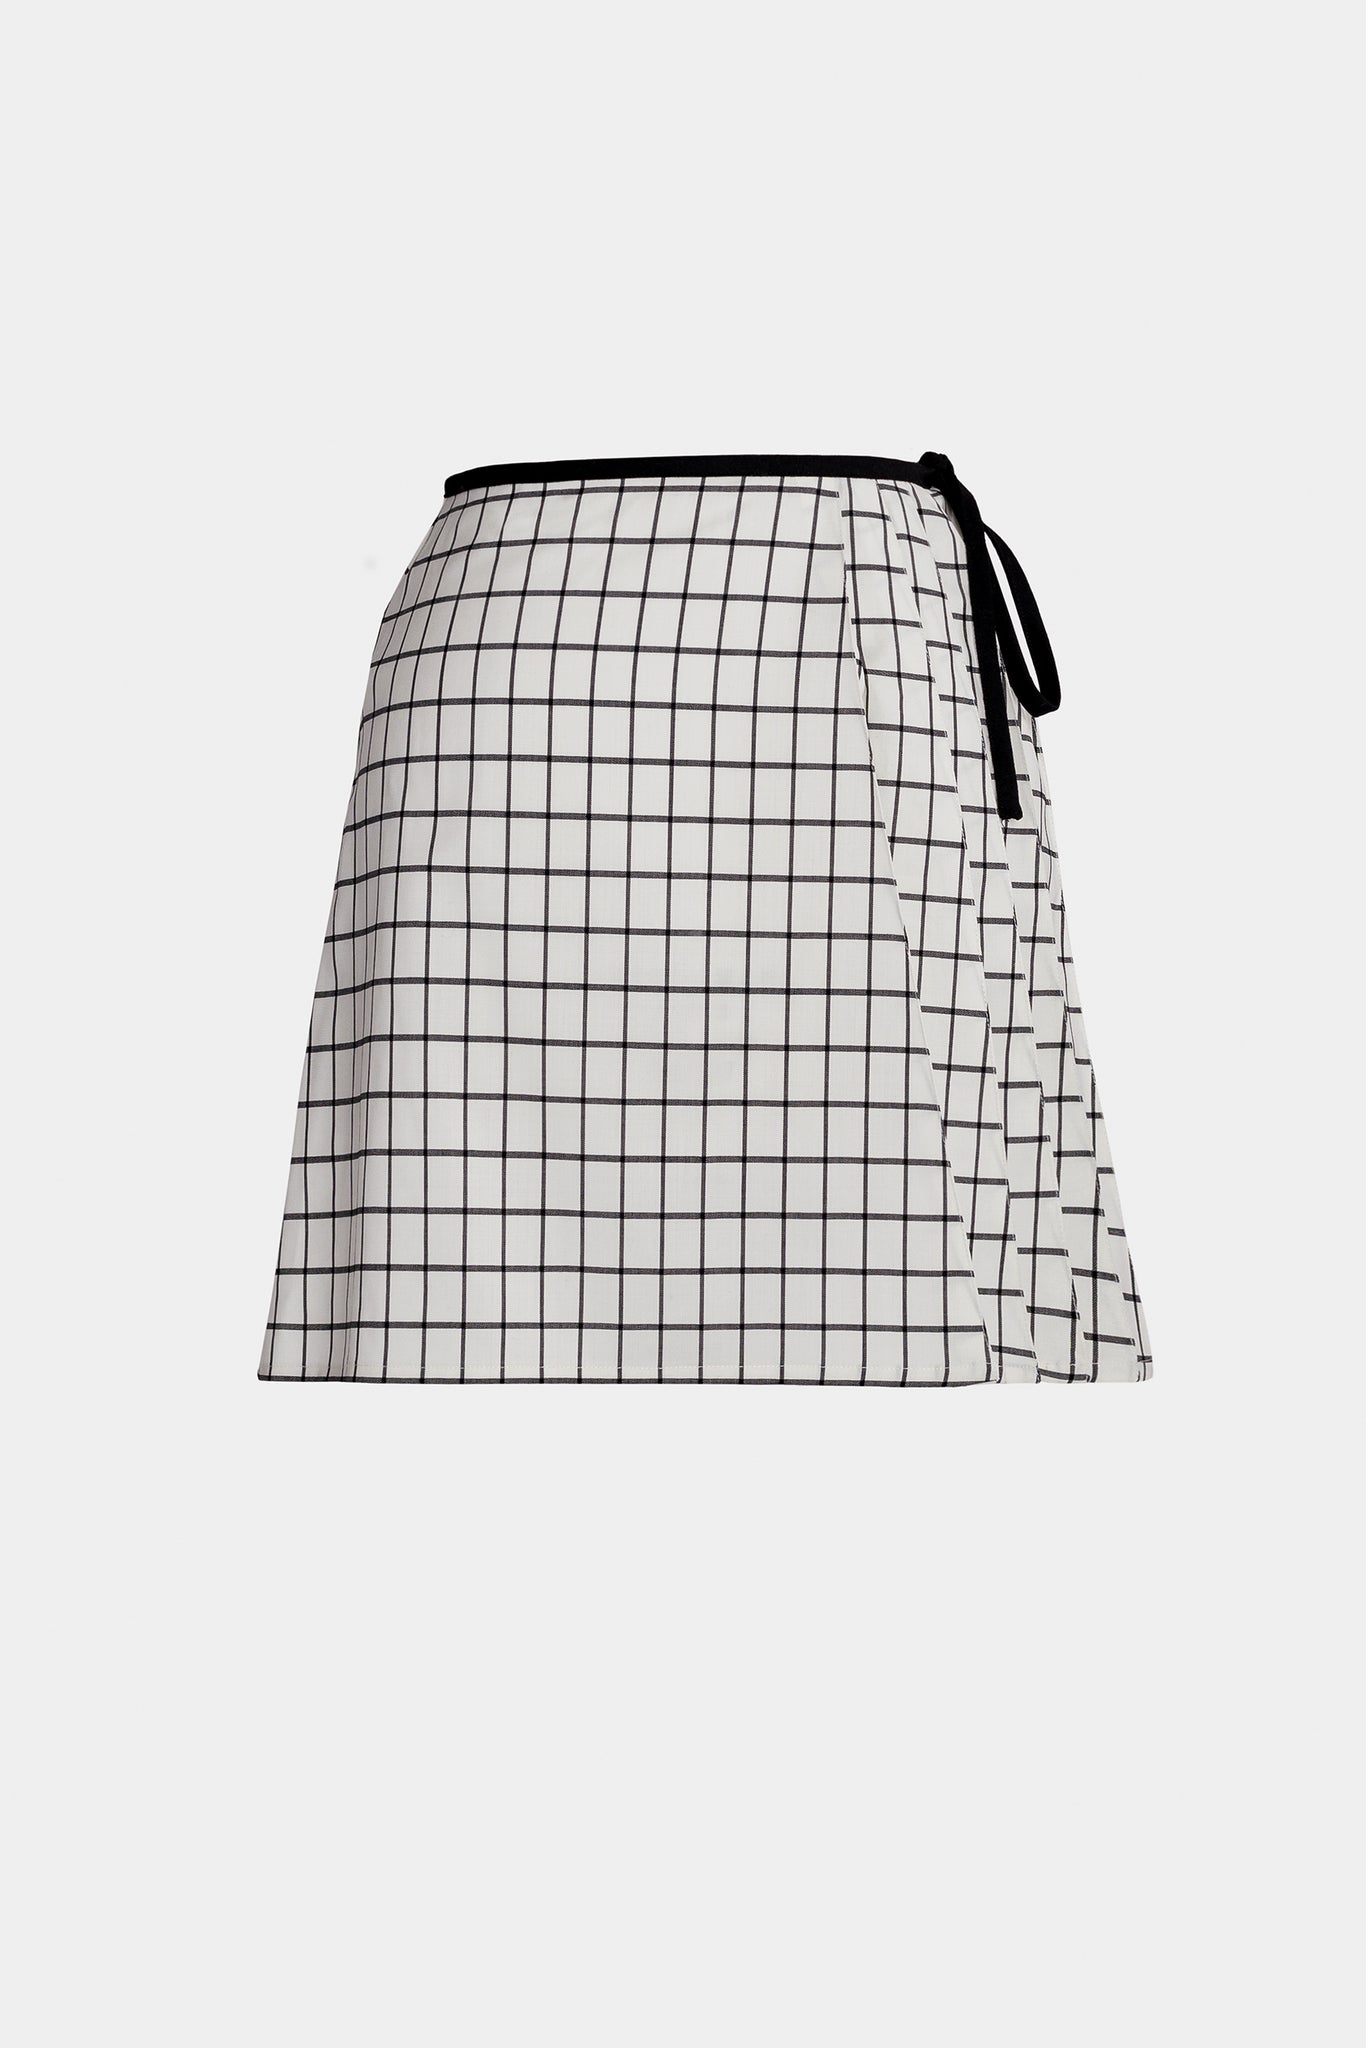 geometric mini skirt, grid pattern with pleats on the side, black cord around the waist fastening into a ribbon, serious and sophisticated avant-garde fashion, for young artists and architects